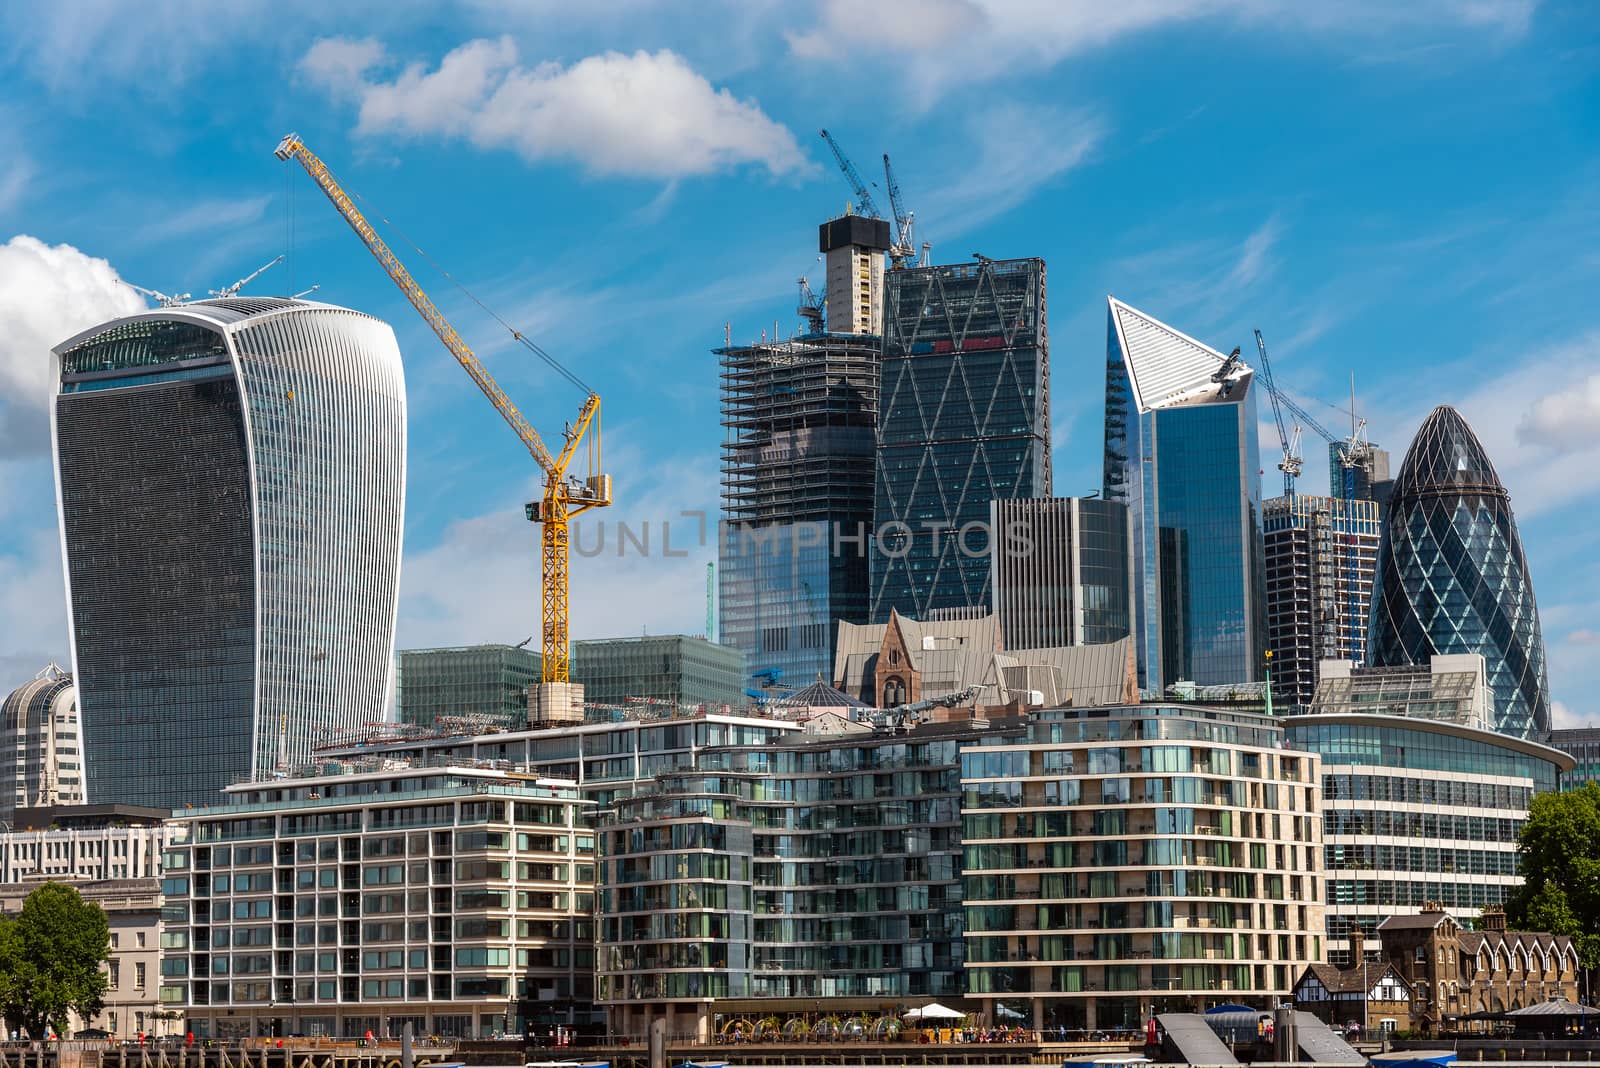 The modern skyscrapers of the City of London on a sunny day